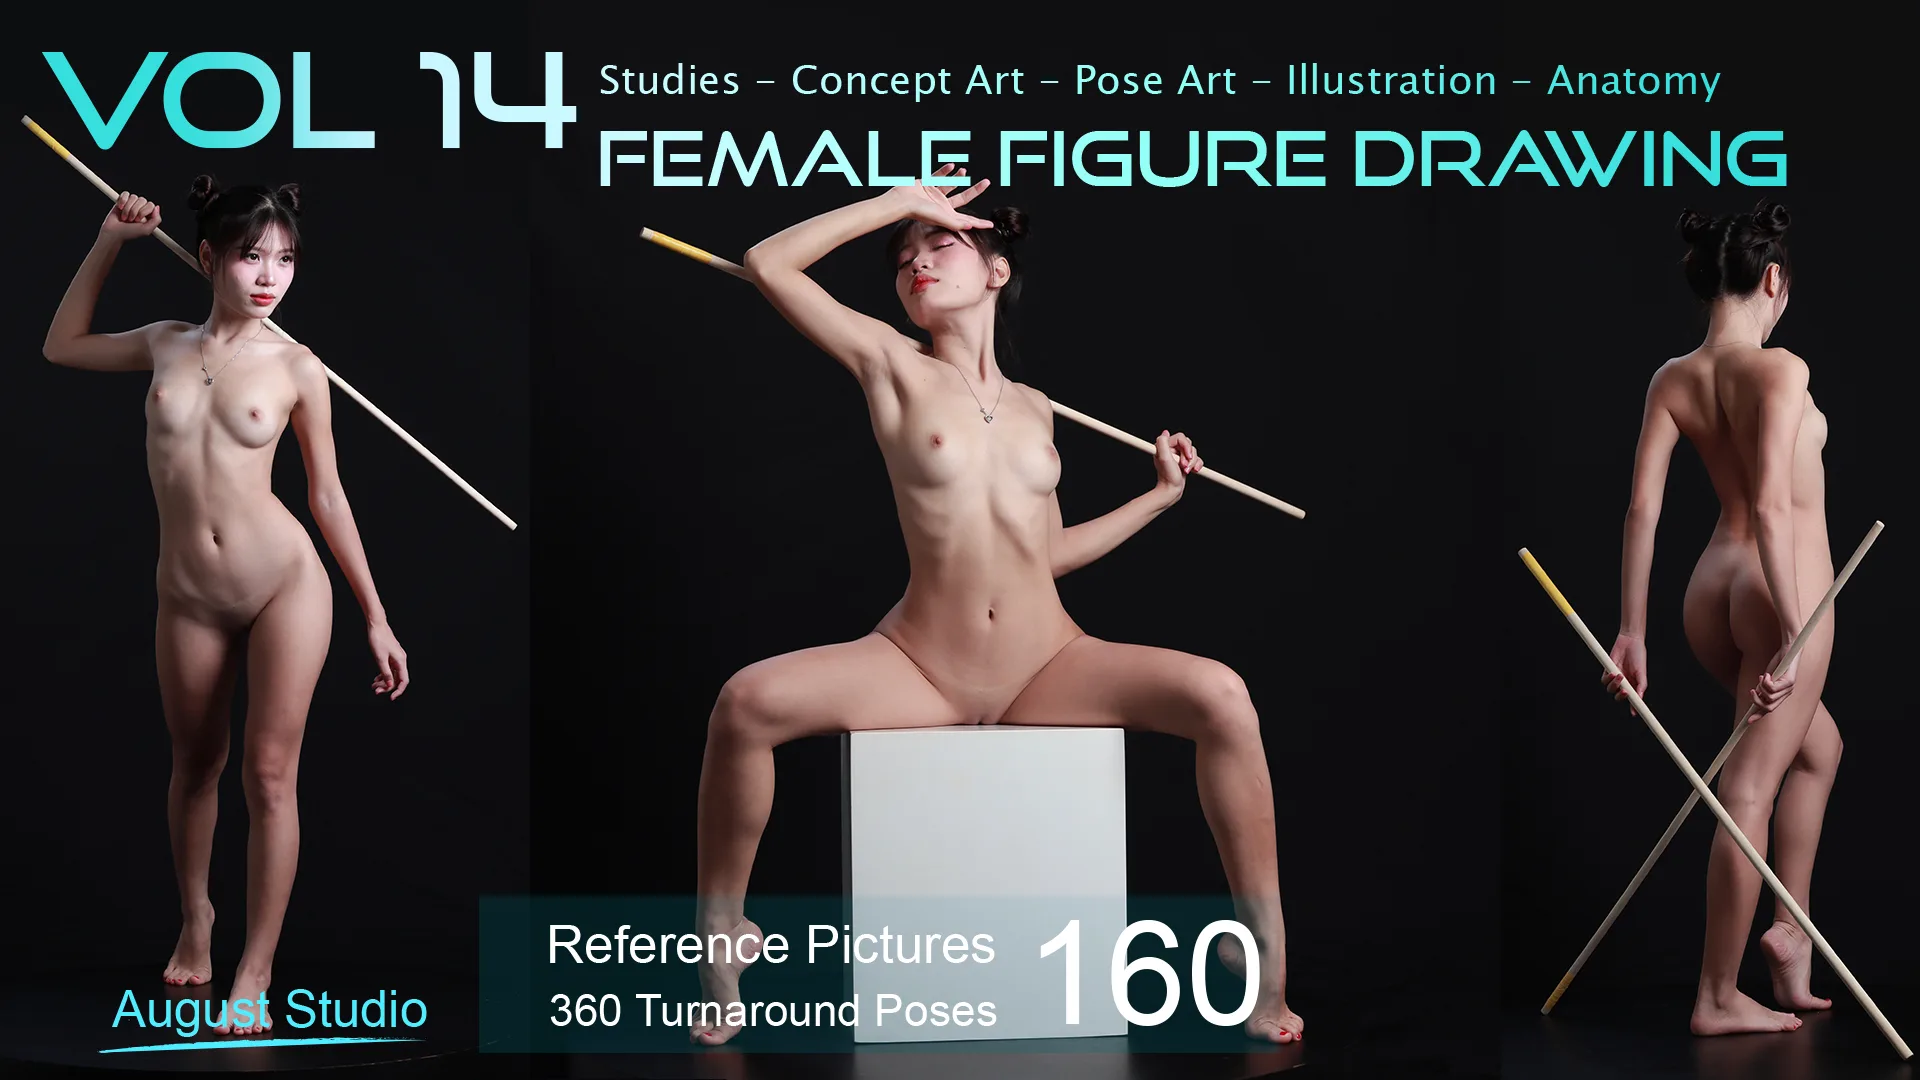 Female Figure Drawing - Vol 14 - Reference Pictures